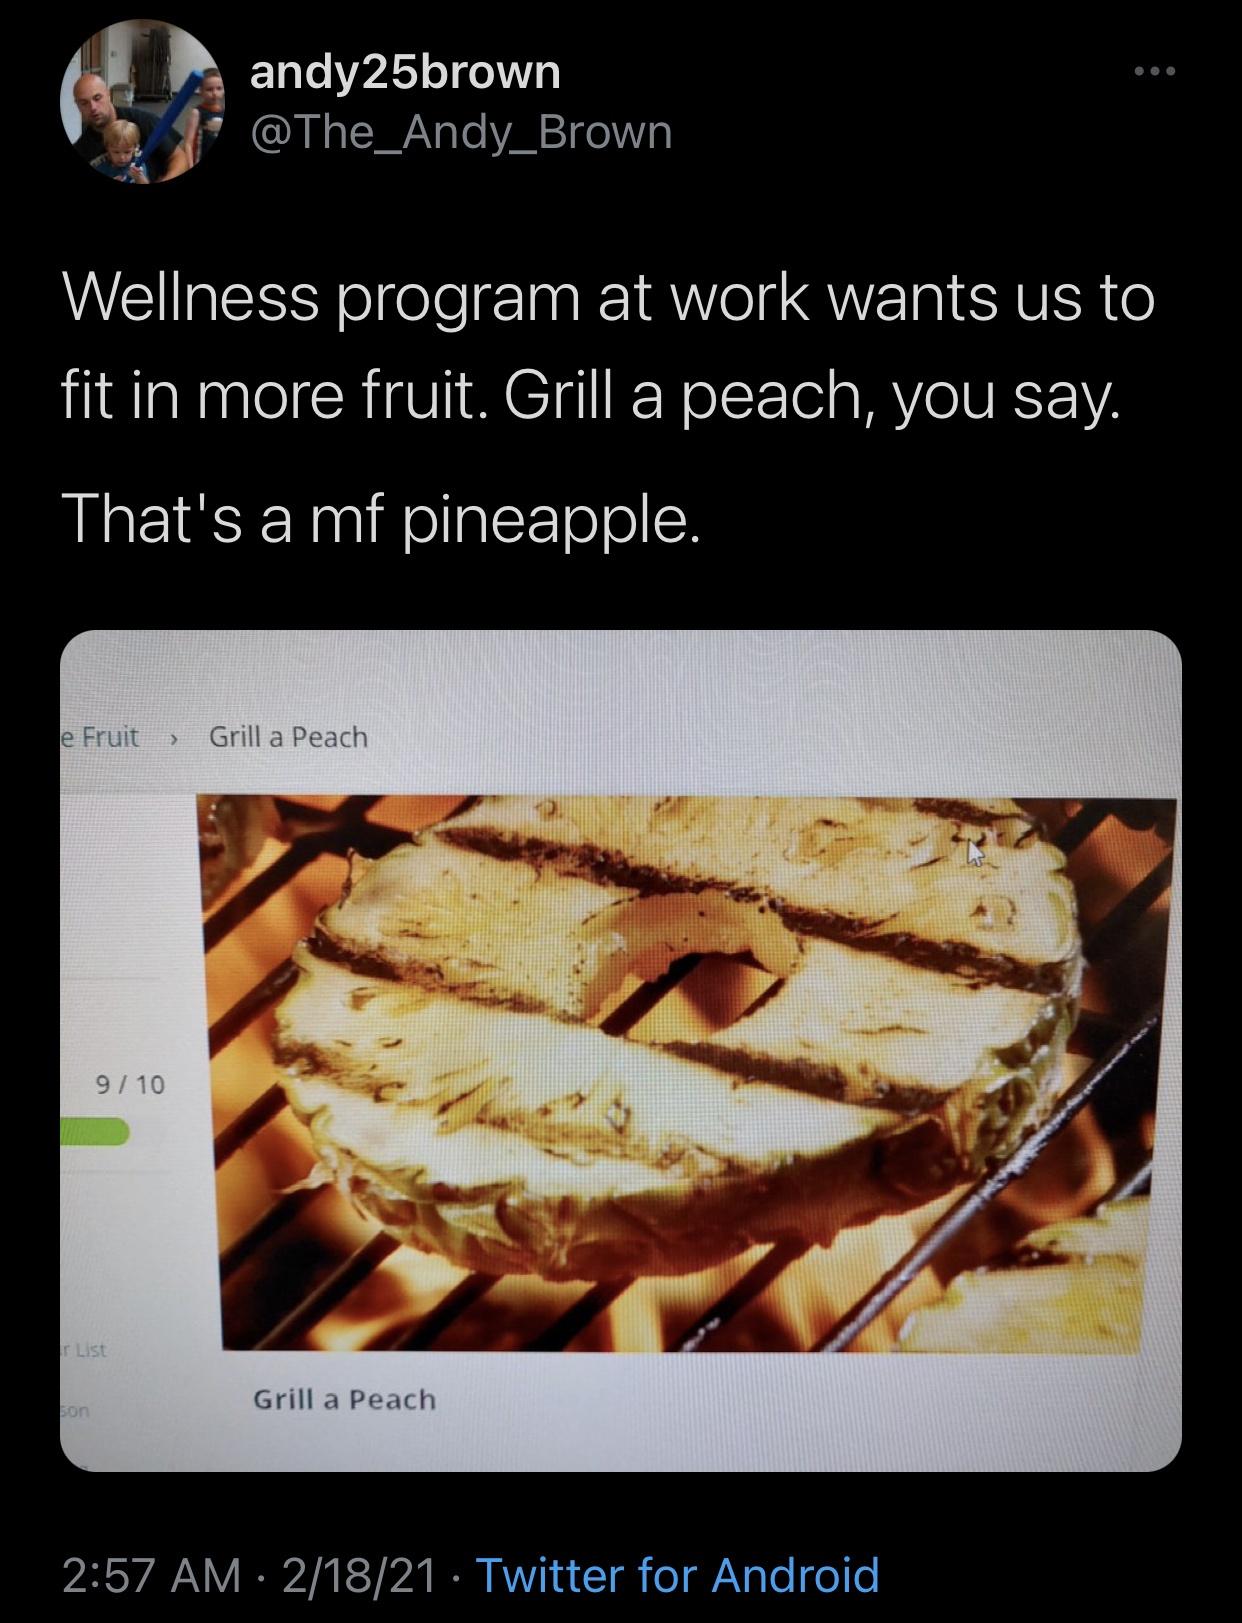 junk food - andy25brown Wellness program at work wants us to fit in more fruit. Grill a peach, you say. That's a mf pineapple. e Fruit > Grill a Peach 910 List Grill a Peach son 21821 Twitter for Android